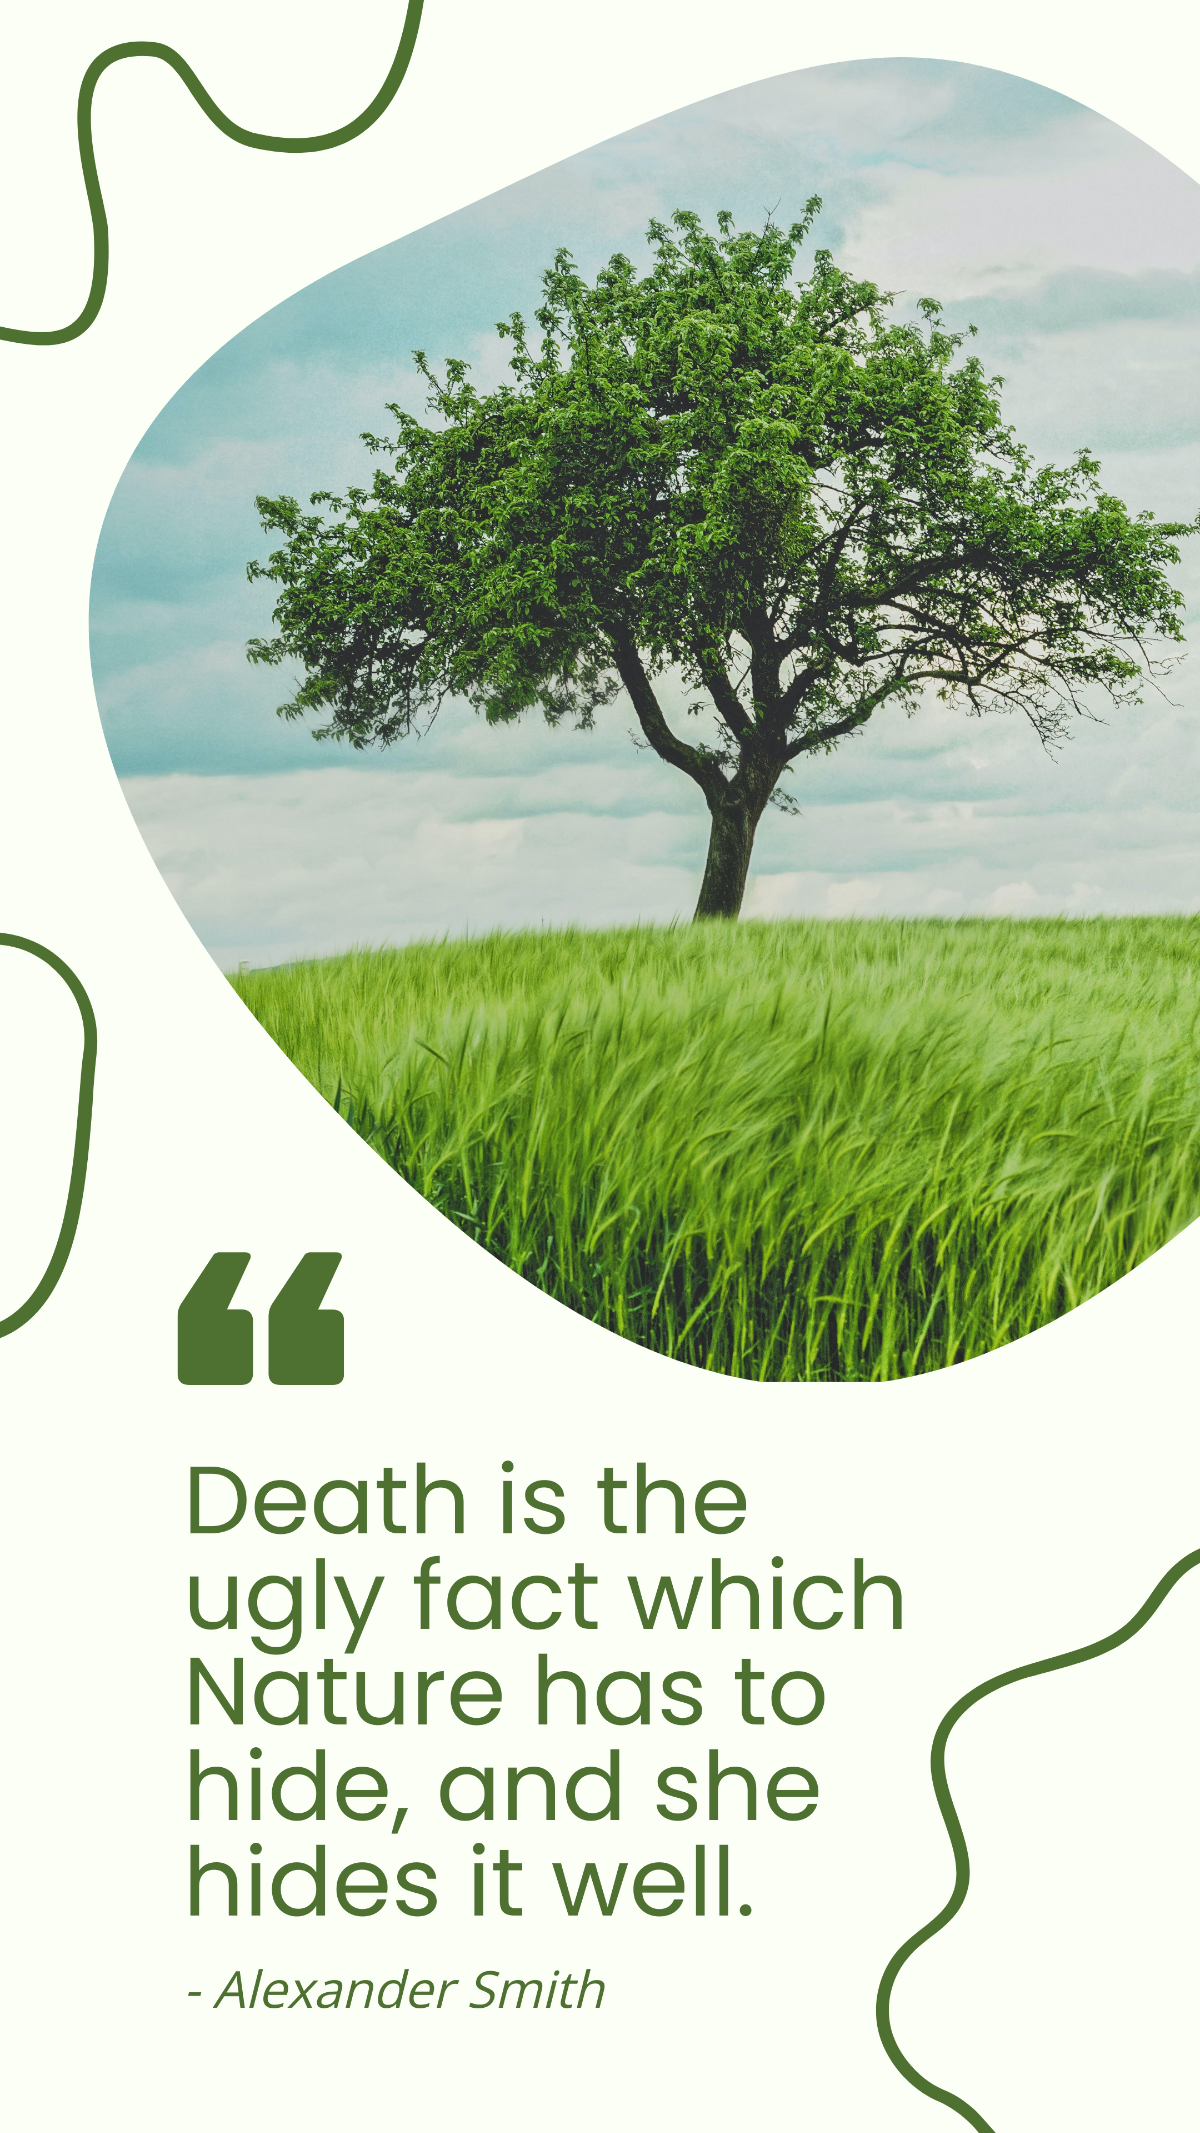 Alexander Smith - Death is the ugly fact which Nature has to hide, and she hides it well. Template